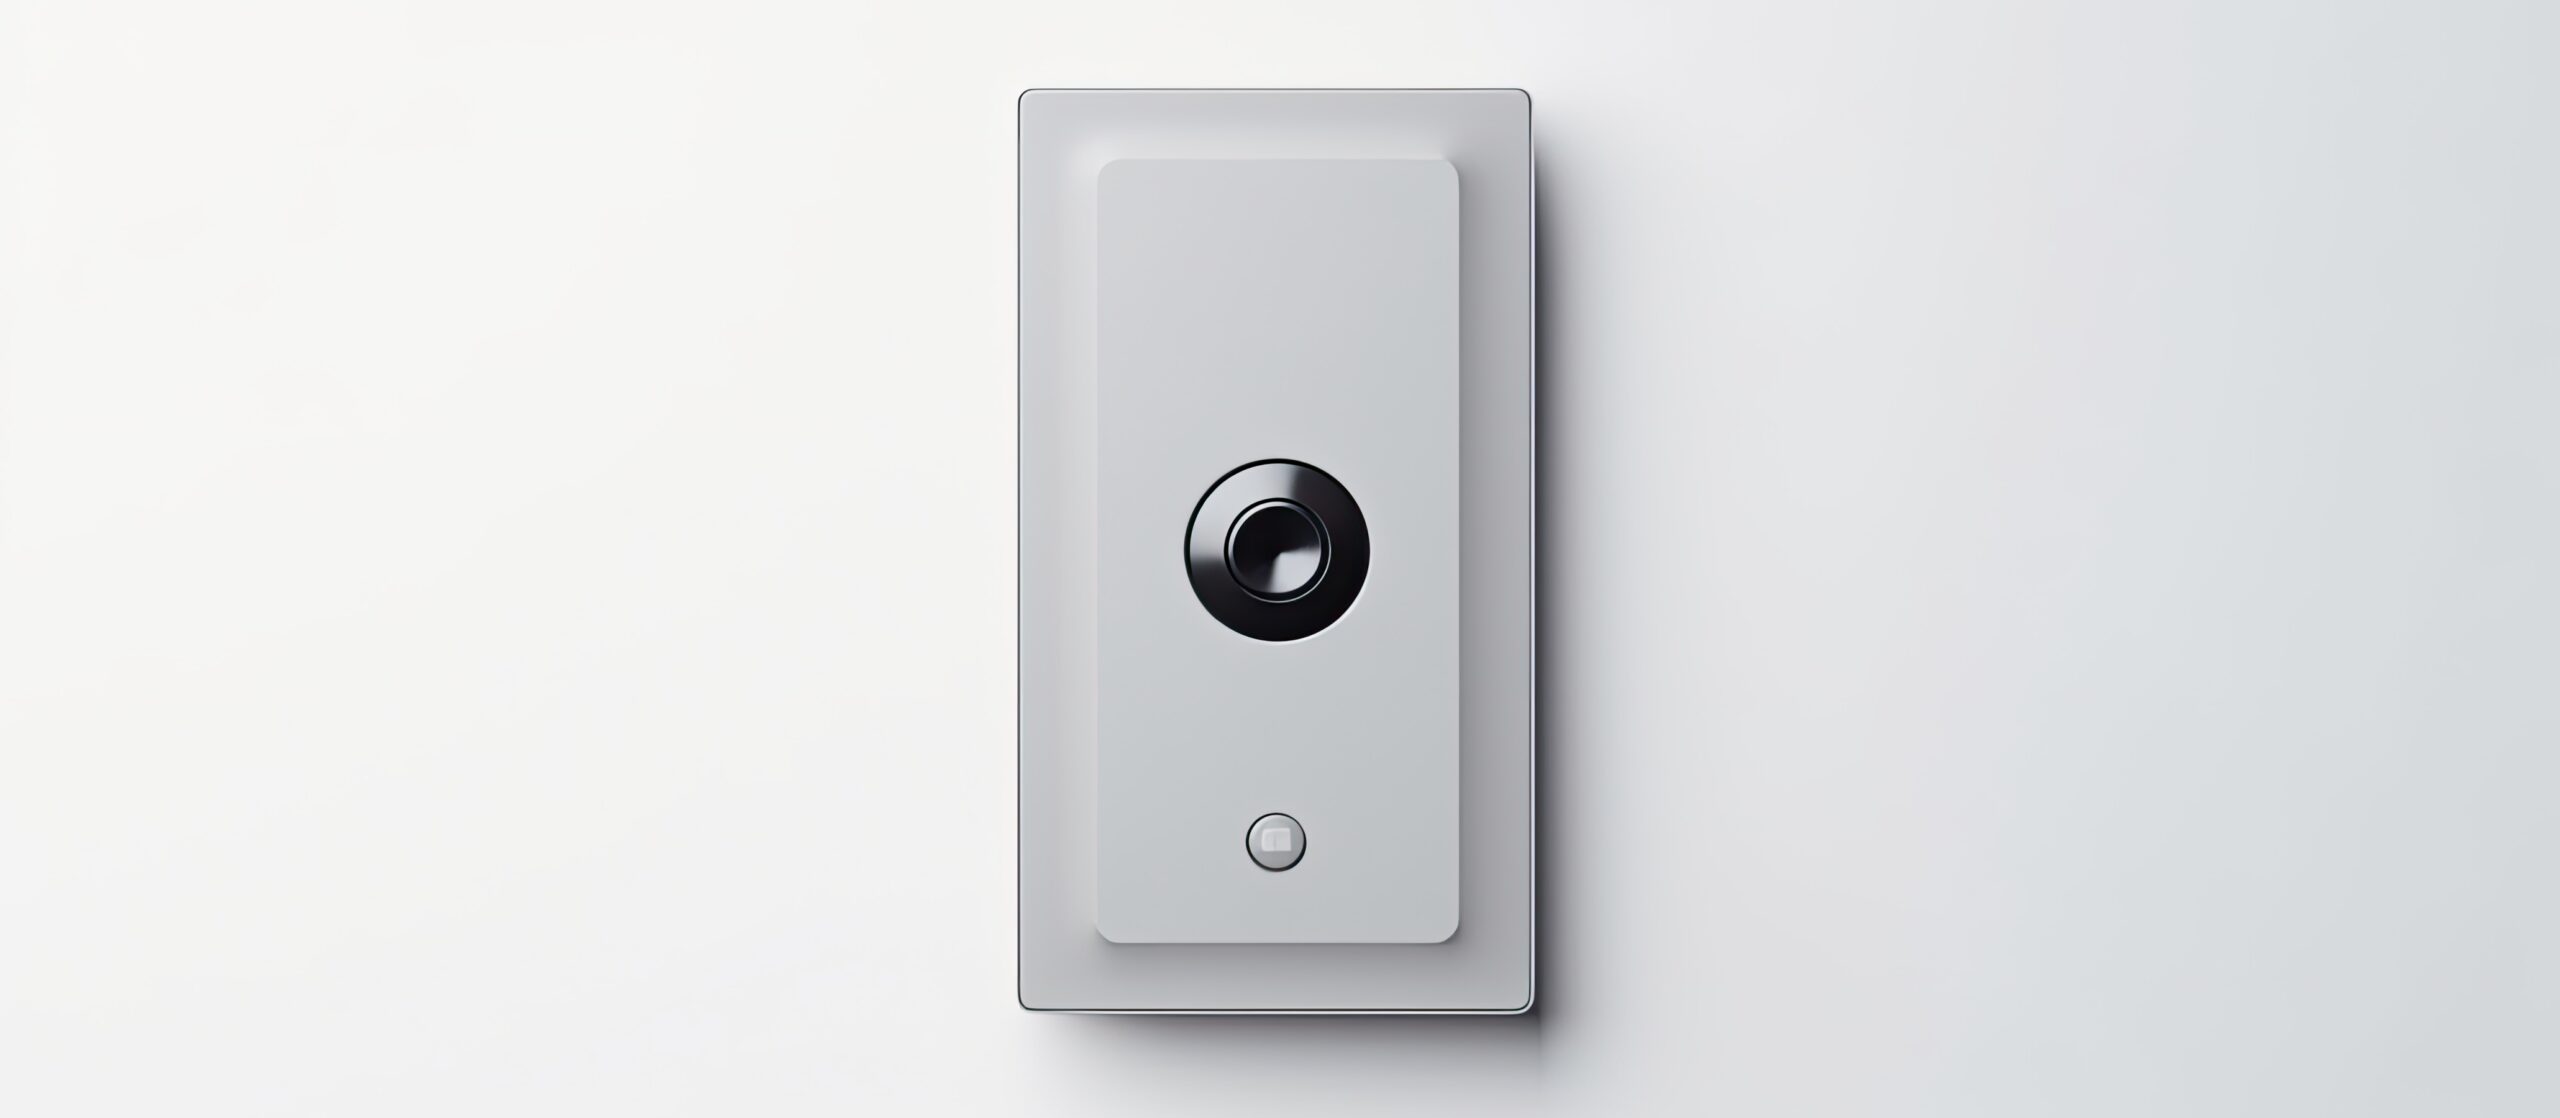 www.appr.com : How To View Ring Doorbell On Samsung Smart TV?